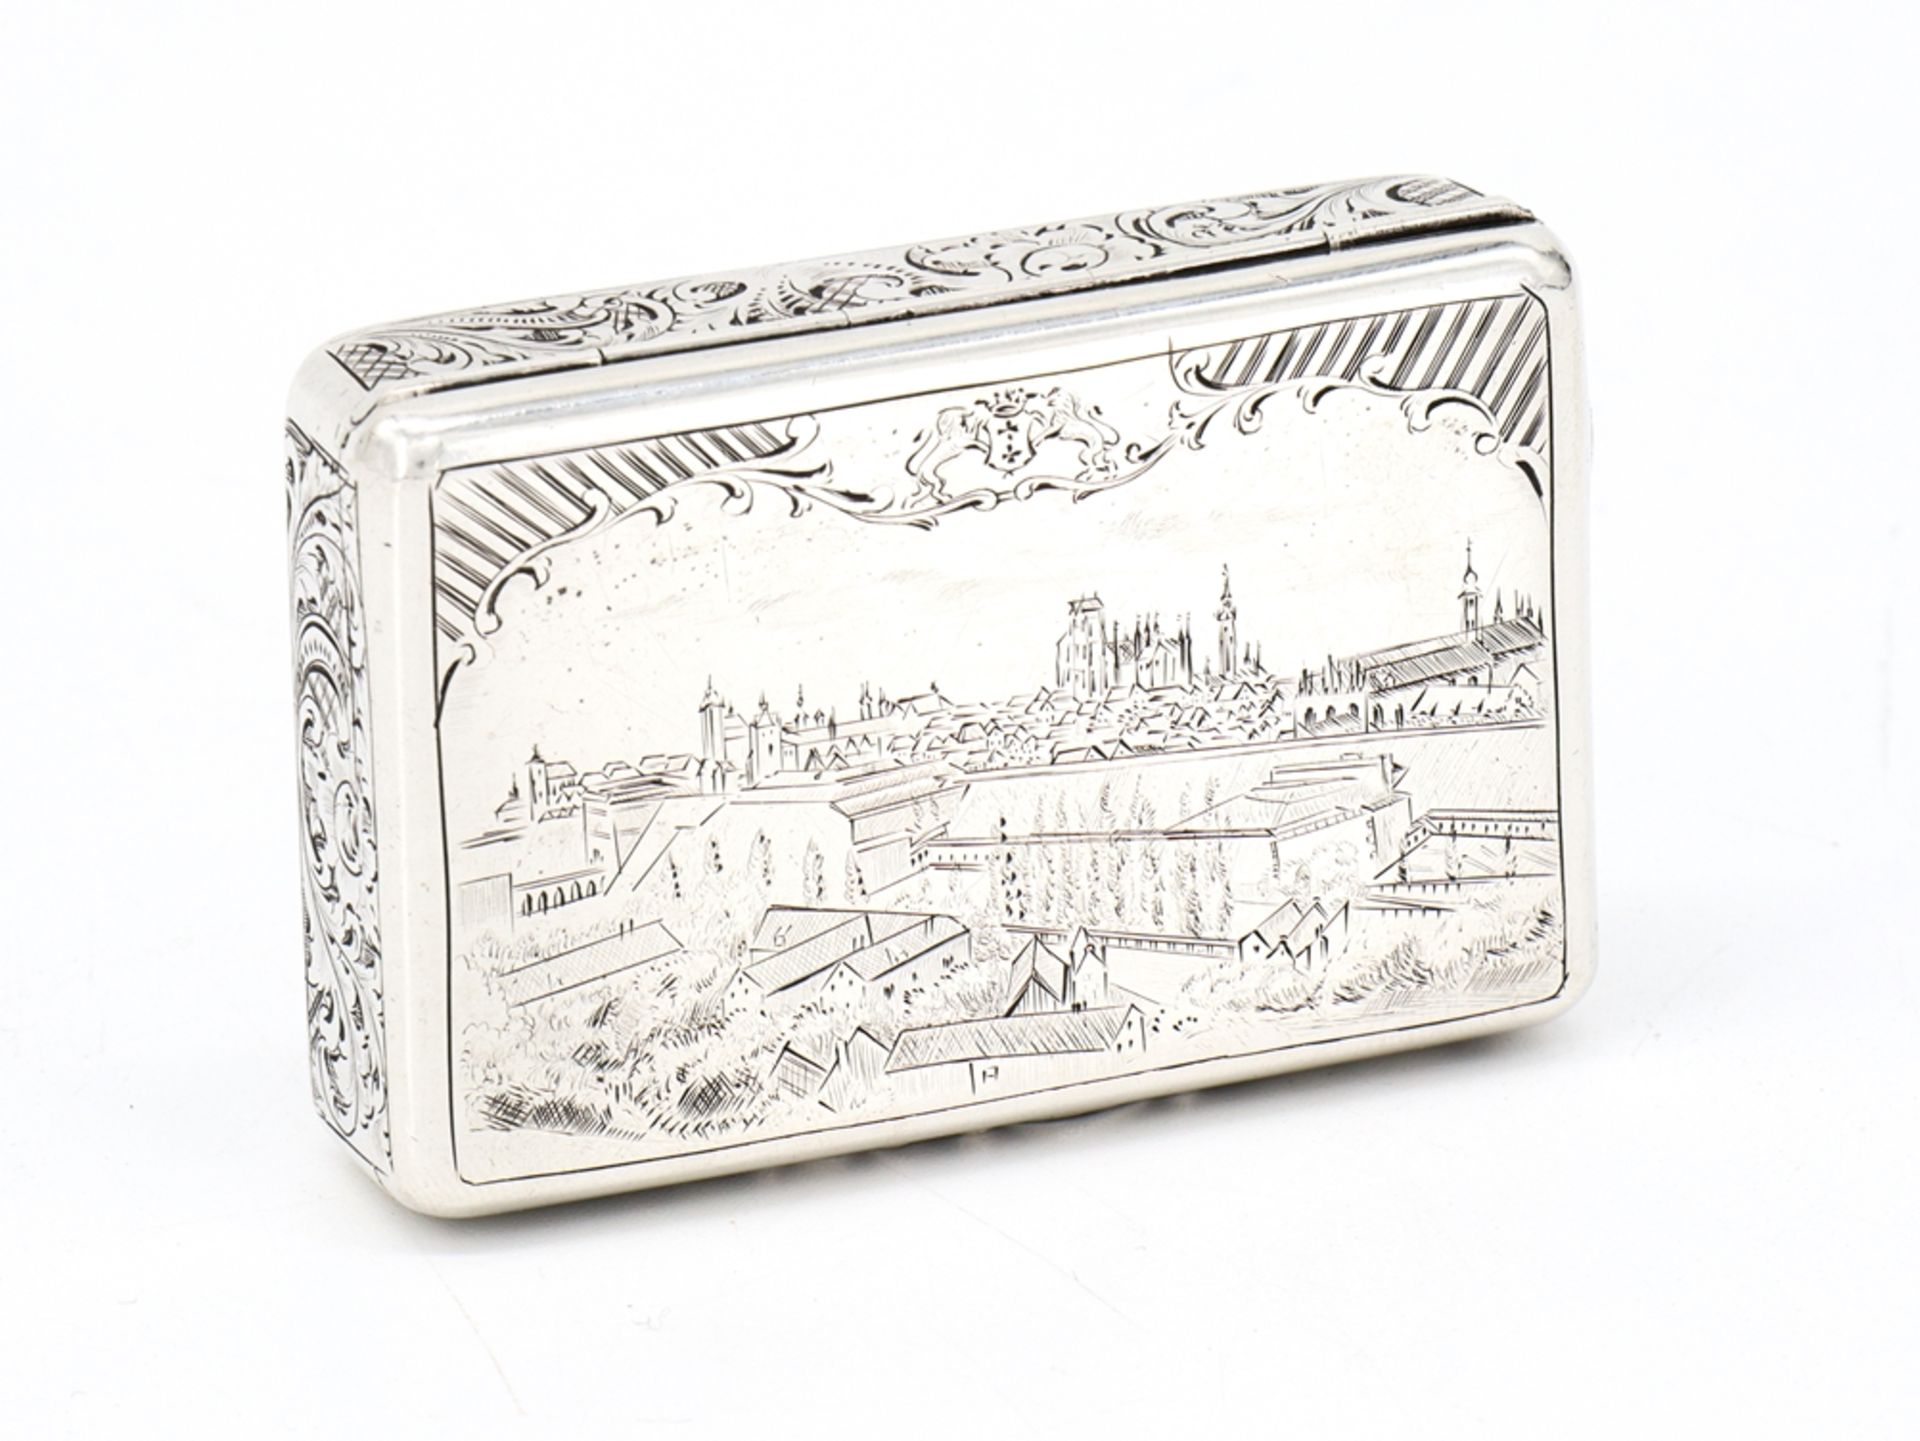 Match silver case with finely chased city view, around 1850 - Image 9 of 9